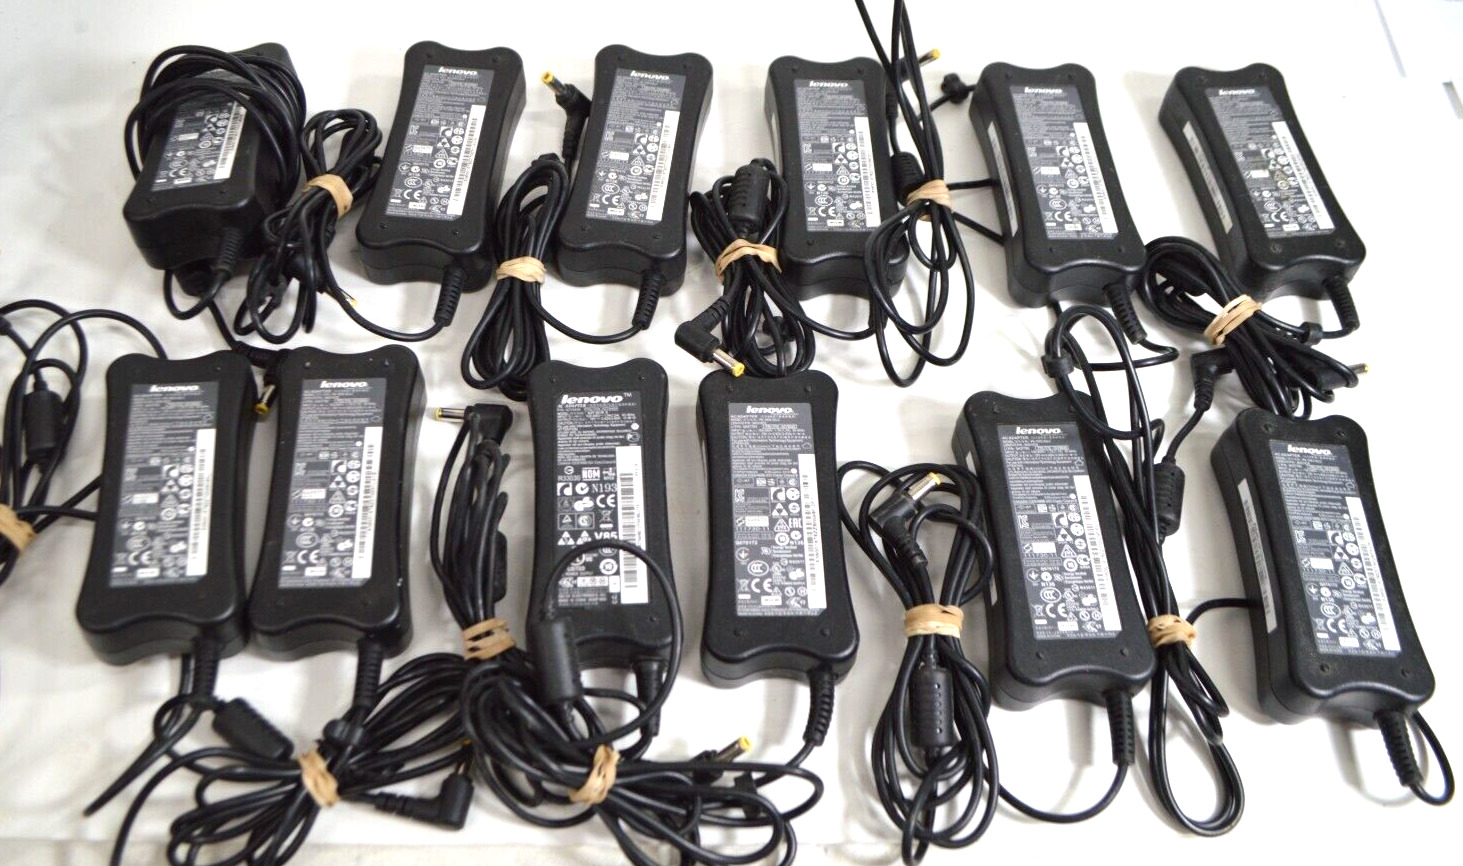 LOT OF 12 Lenovo 36001678 54Y8848 65W AC Power Adapter PA-1650-52LC